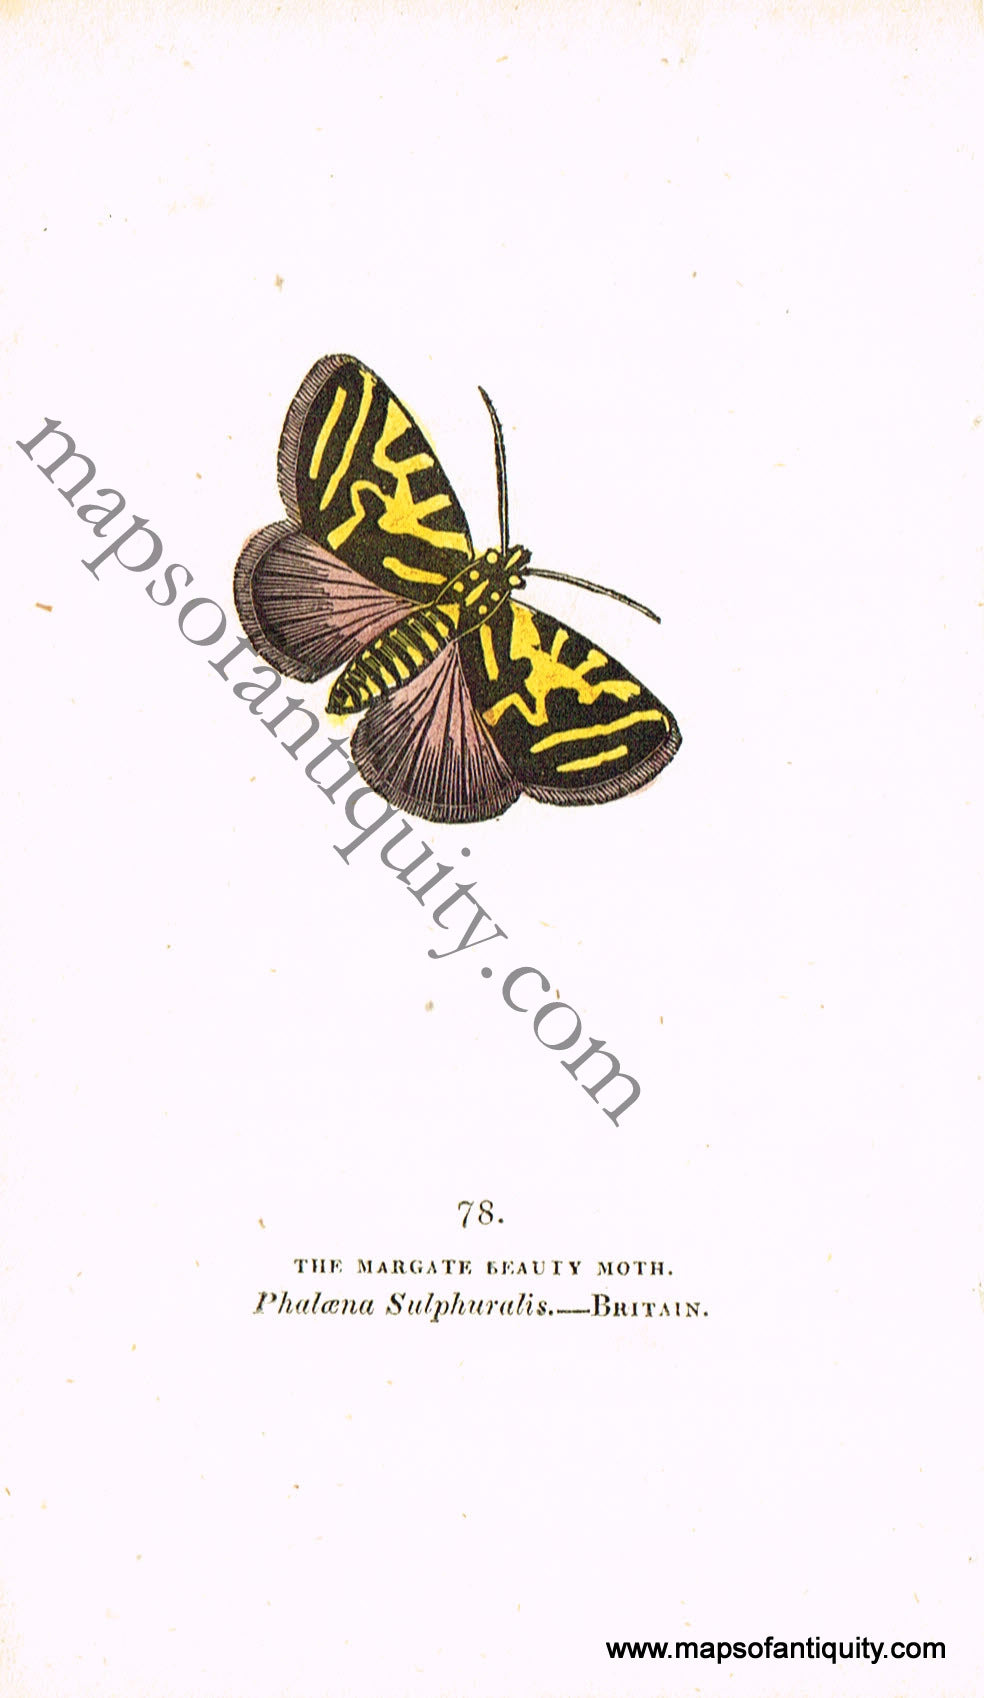 Antique-Hand-Colored-Engraved-Illustration-The-Margate-Beauty-Moth-Antique-Prints-Natural-History-Insects-1832-Brown-Maps-Of-Antiquity